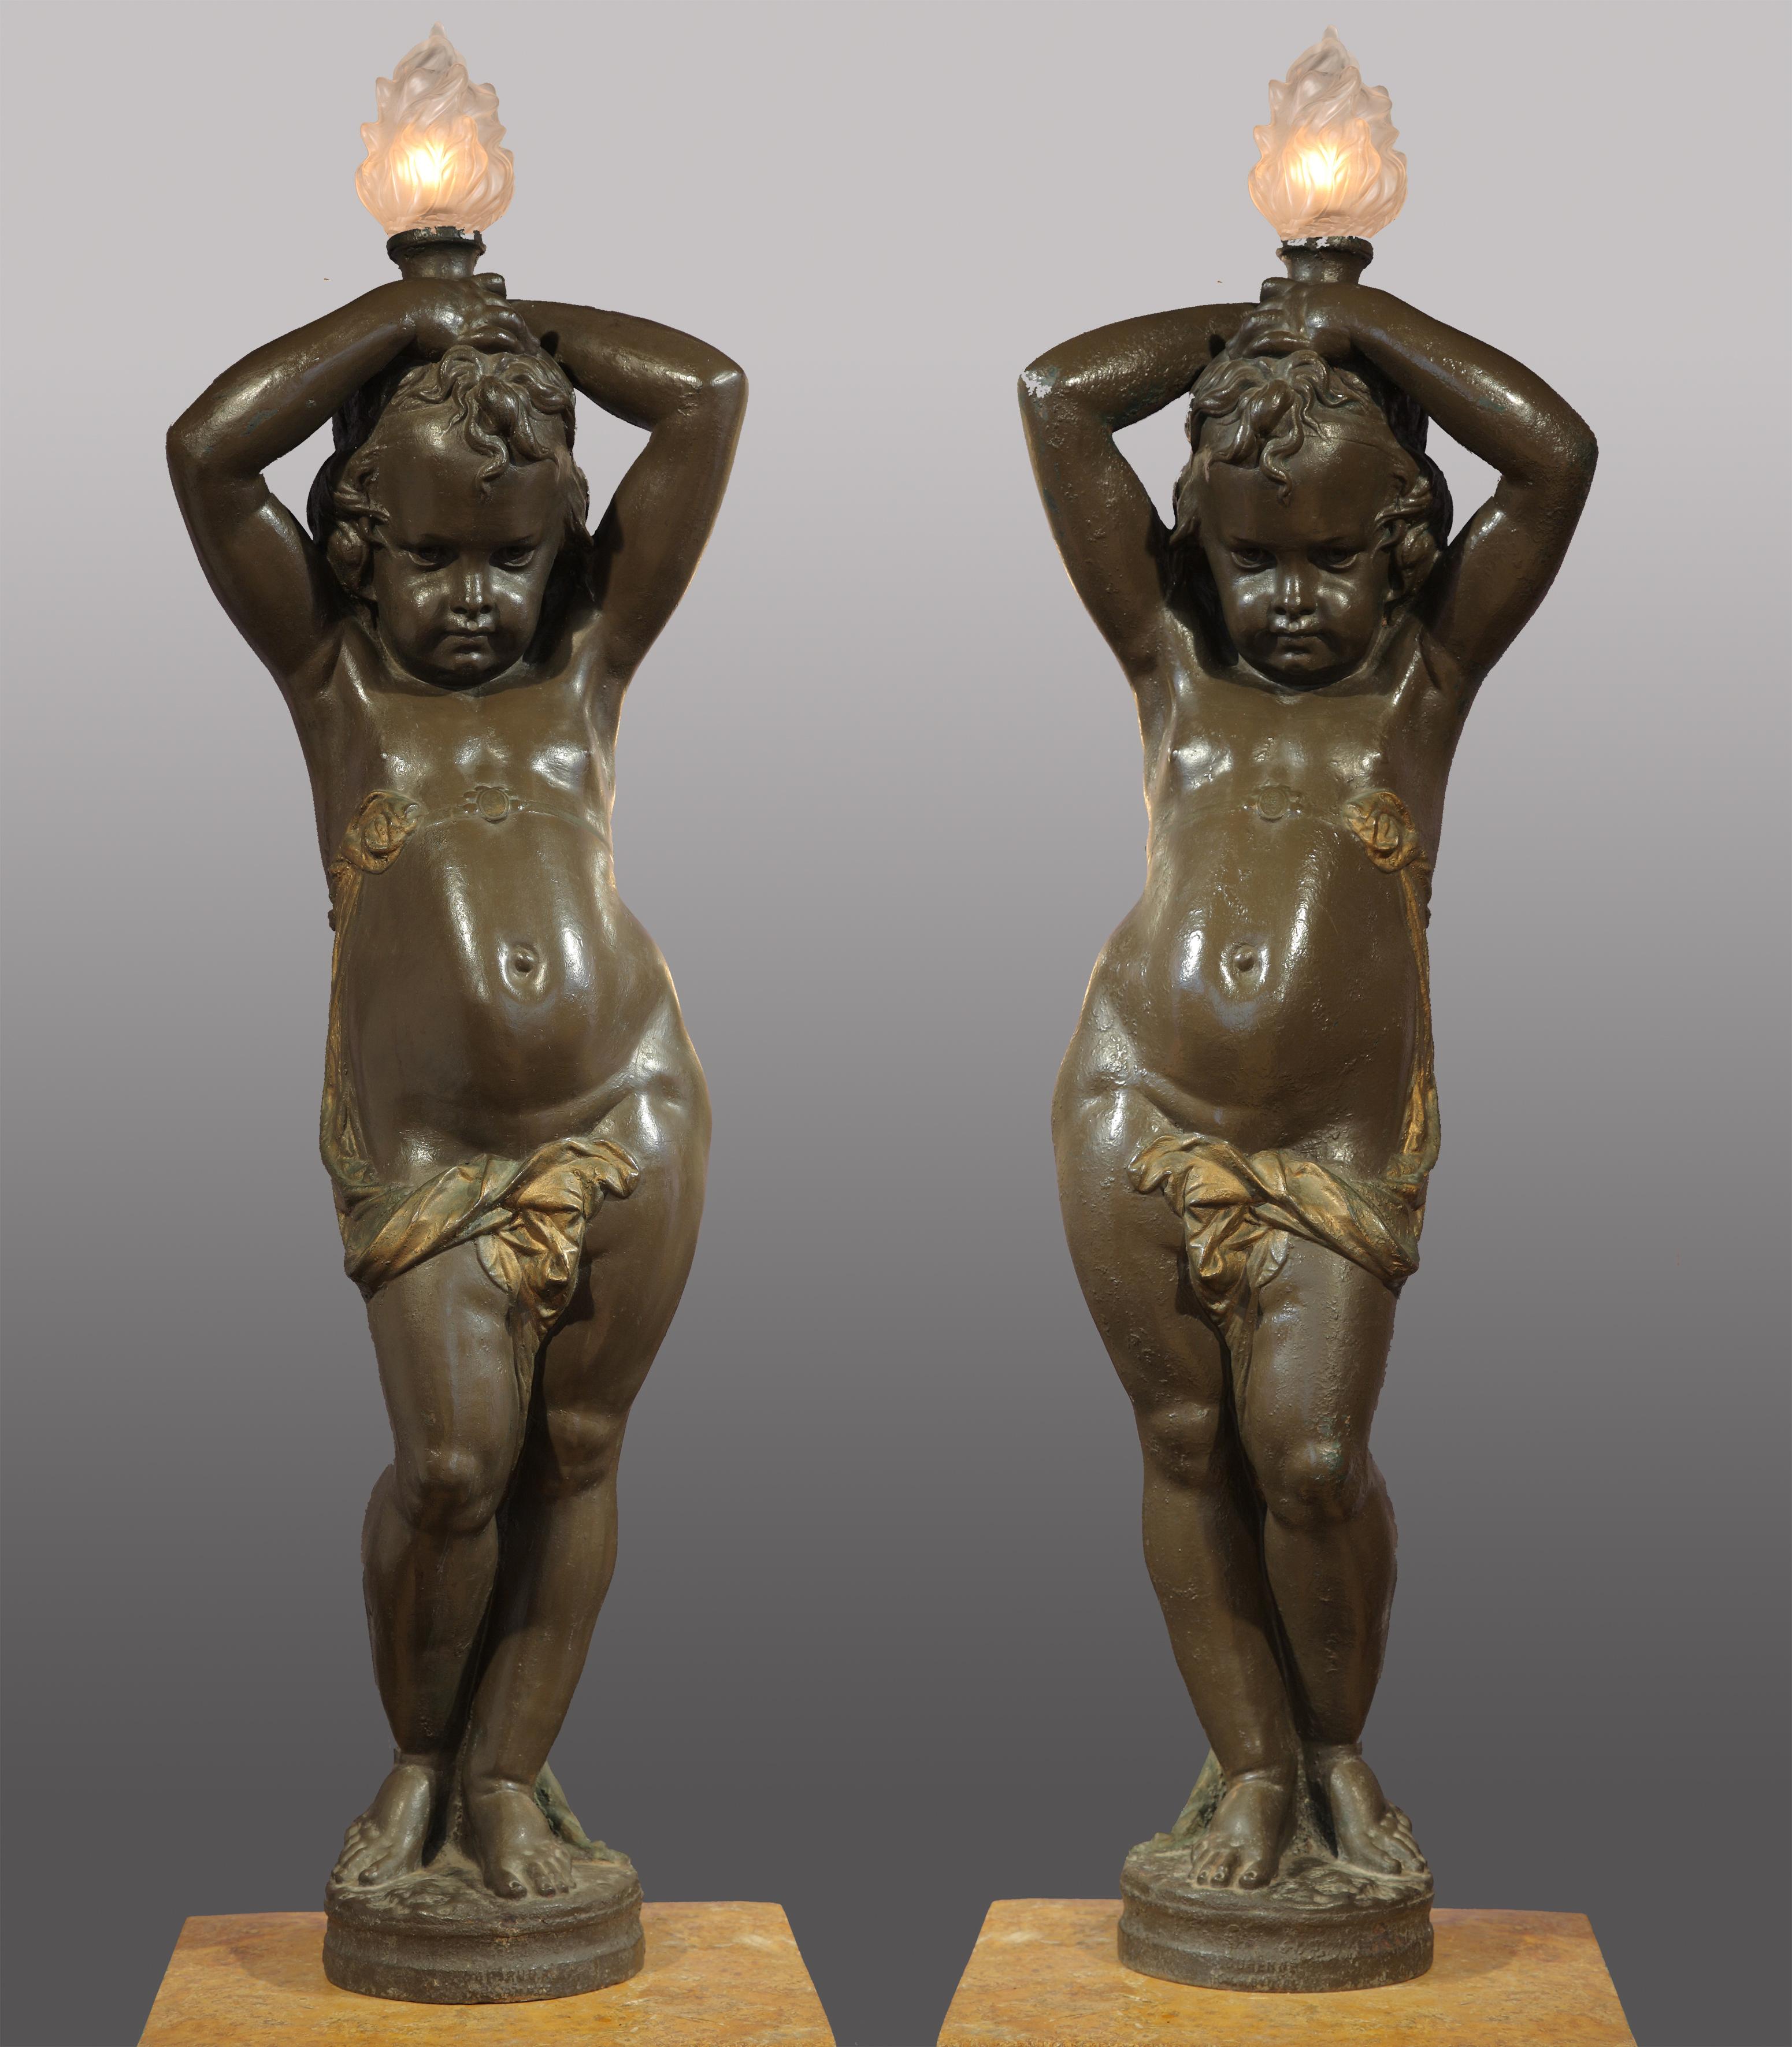 Signed A. Durenne et Sommevoire
Pair of putti torchere-holders, made in dark brown-green patinated iron-cast, enlighted with gilding on the drapes.

Models of putti torchere-holders exposed by A. Durenne at the 1867 Paris Universal Exhibition.